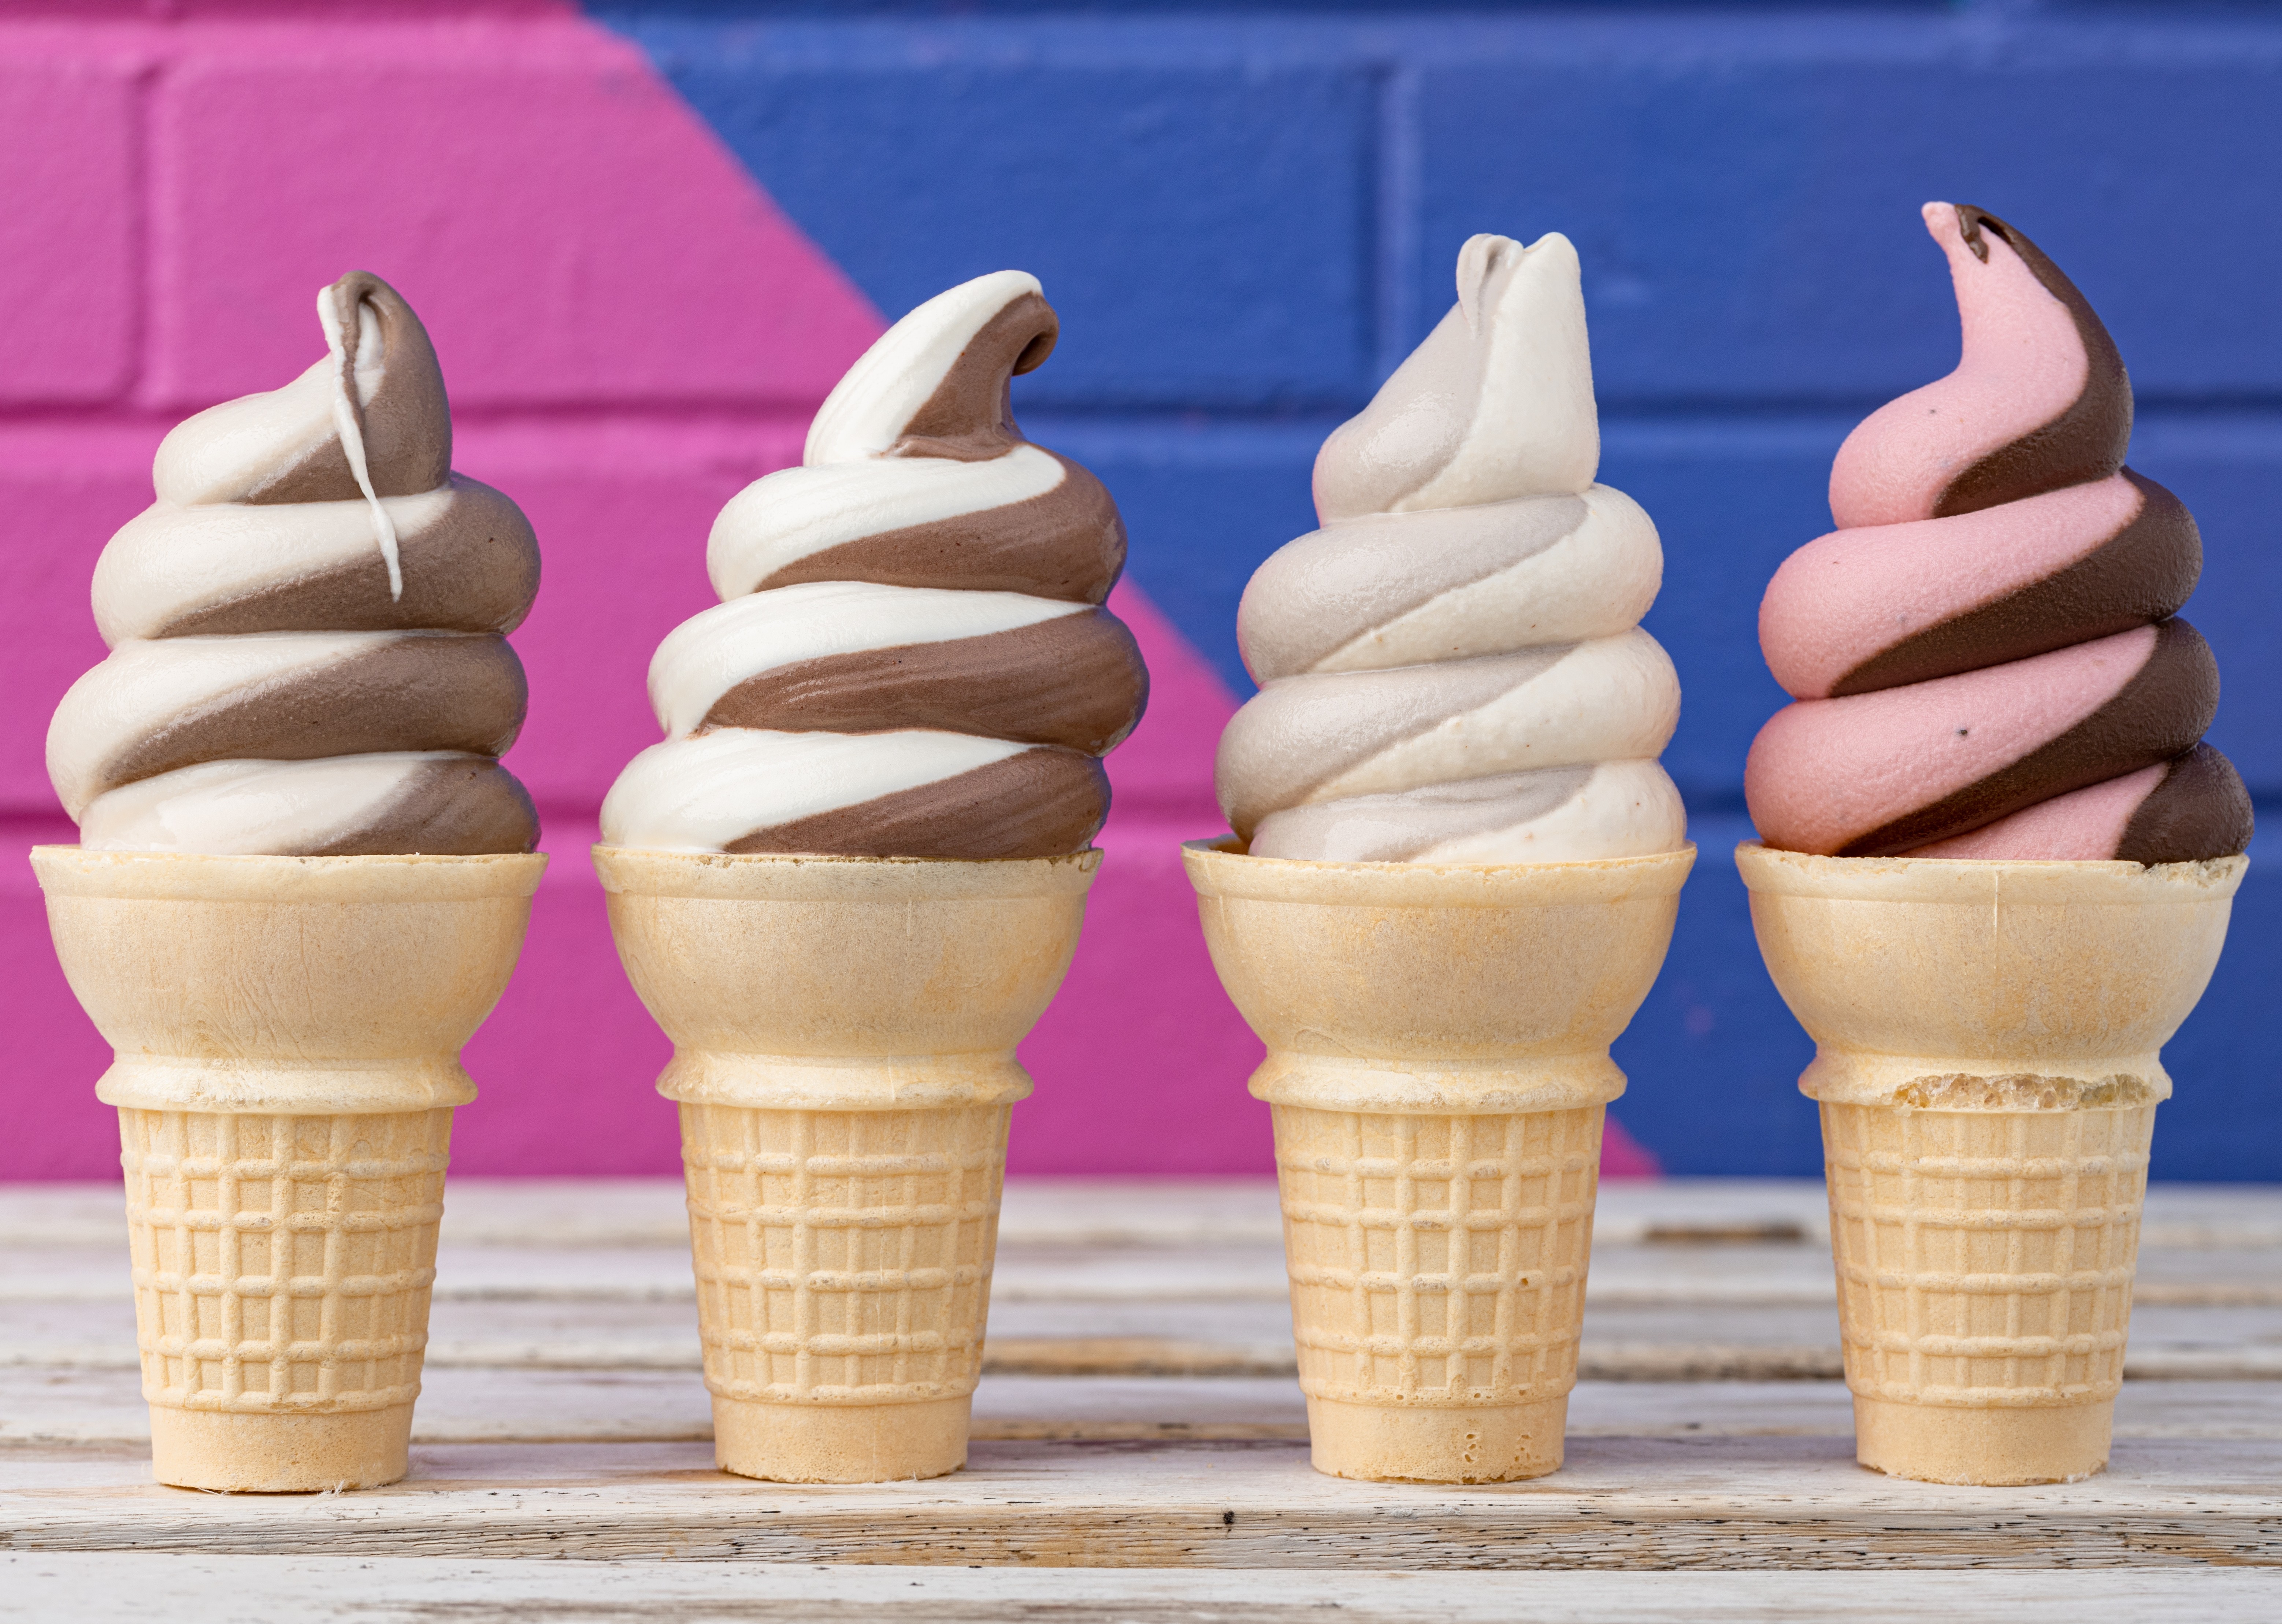 Denver Has a Lot of Ice Cream Options, But the Soft Serve Scene Is Lacking